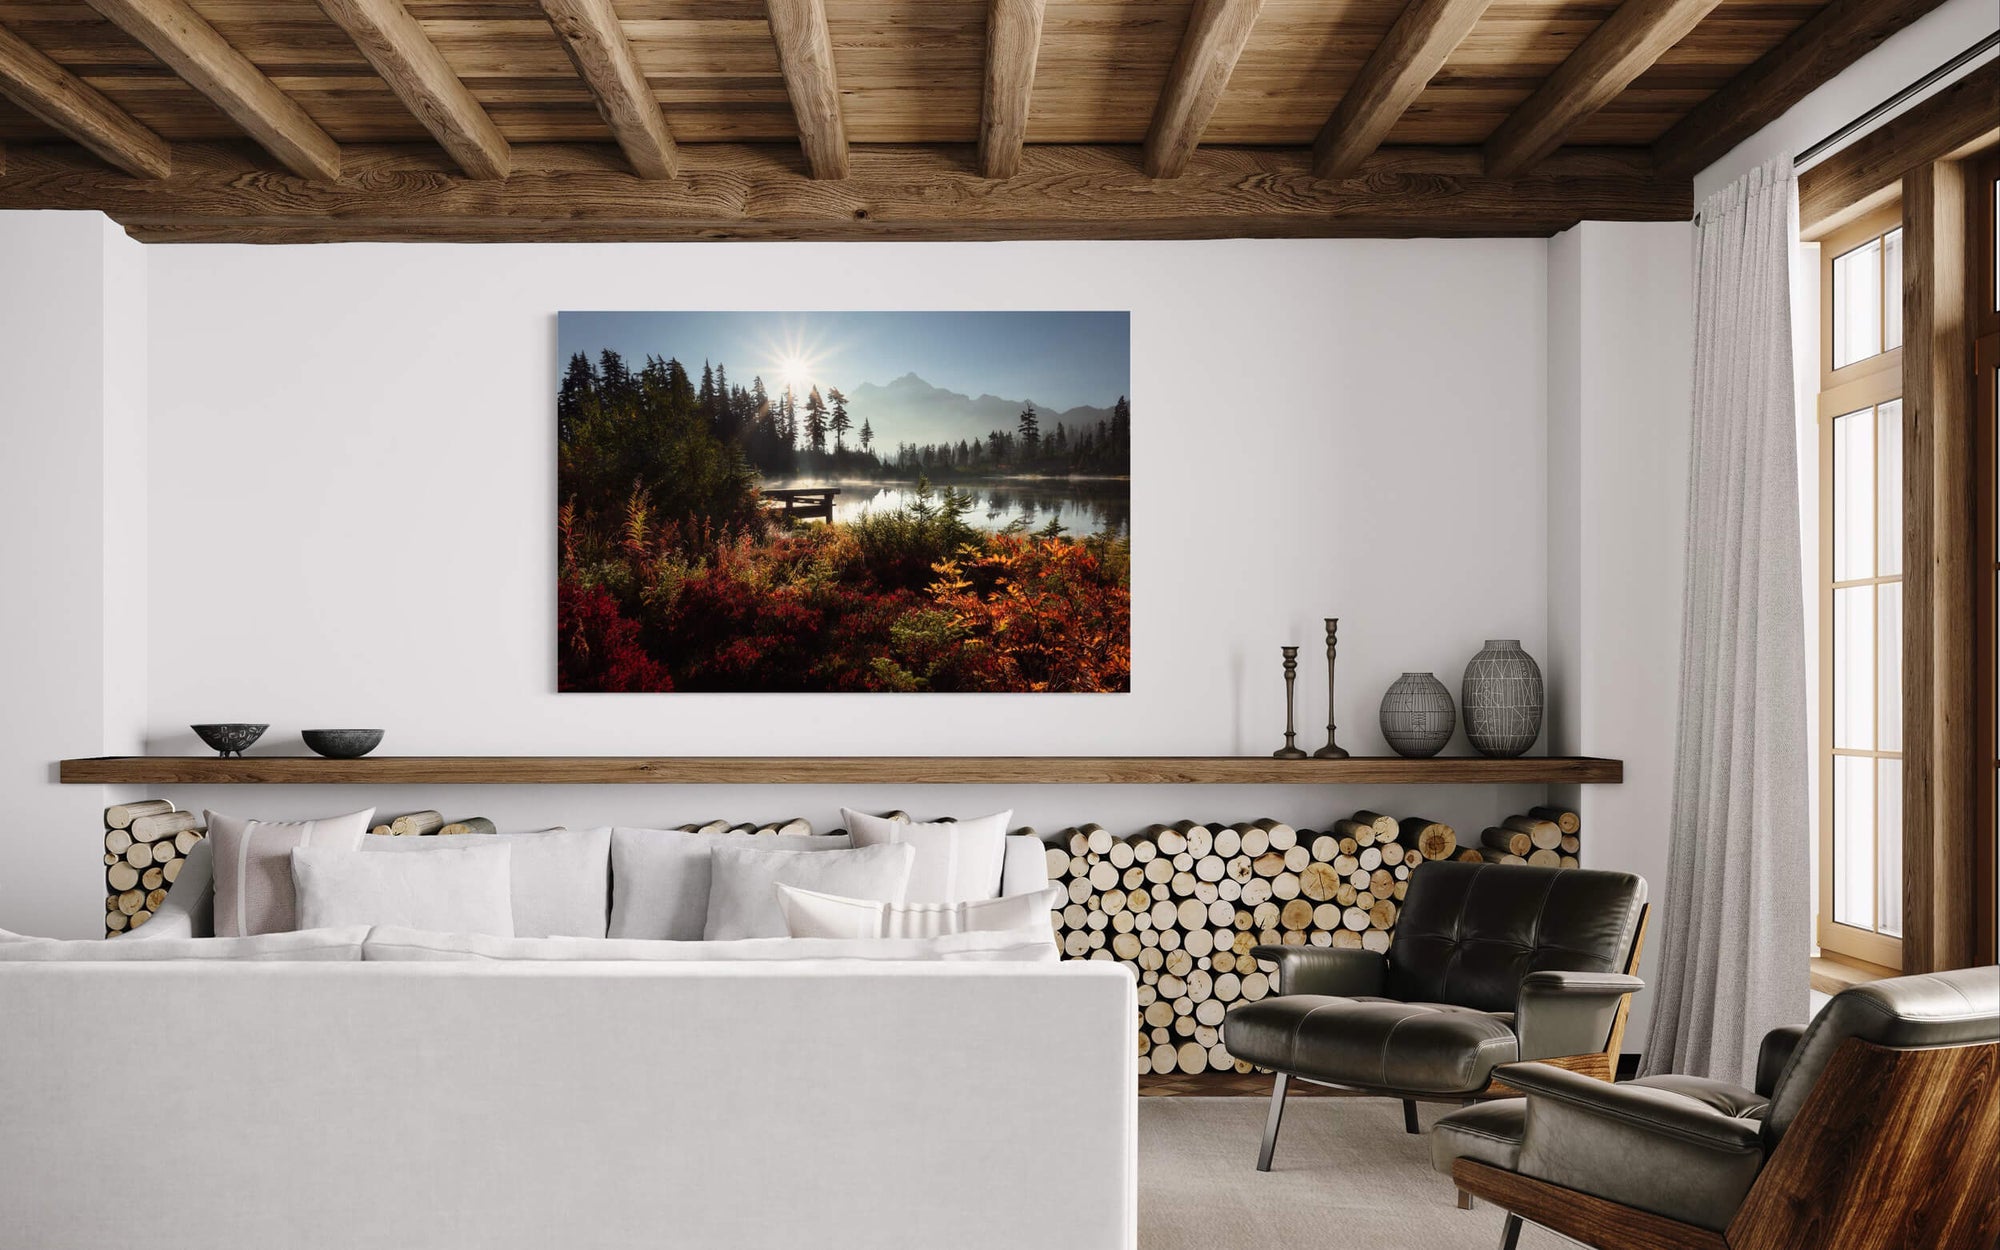 A Picture Lake photograph created near Mount Baker hangs in a living room.